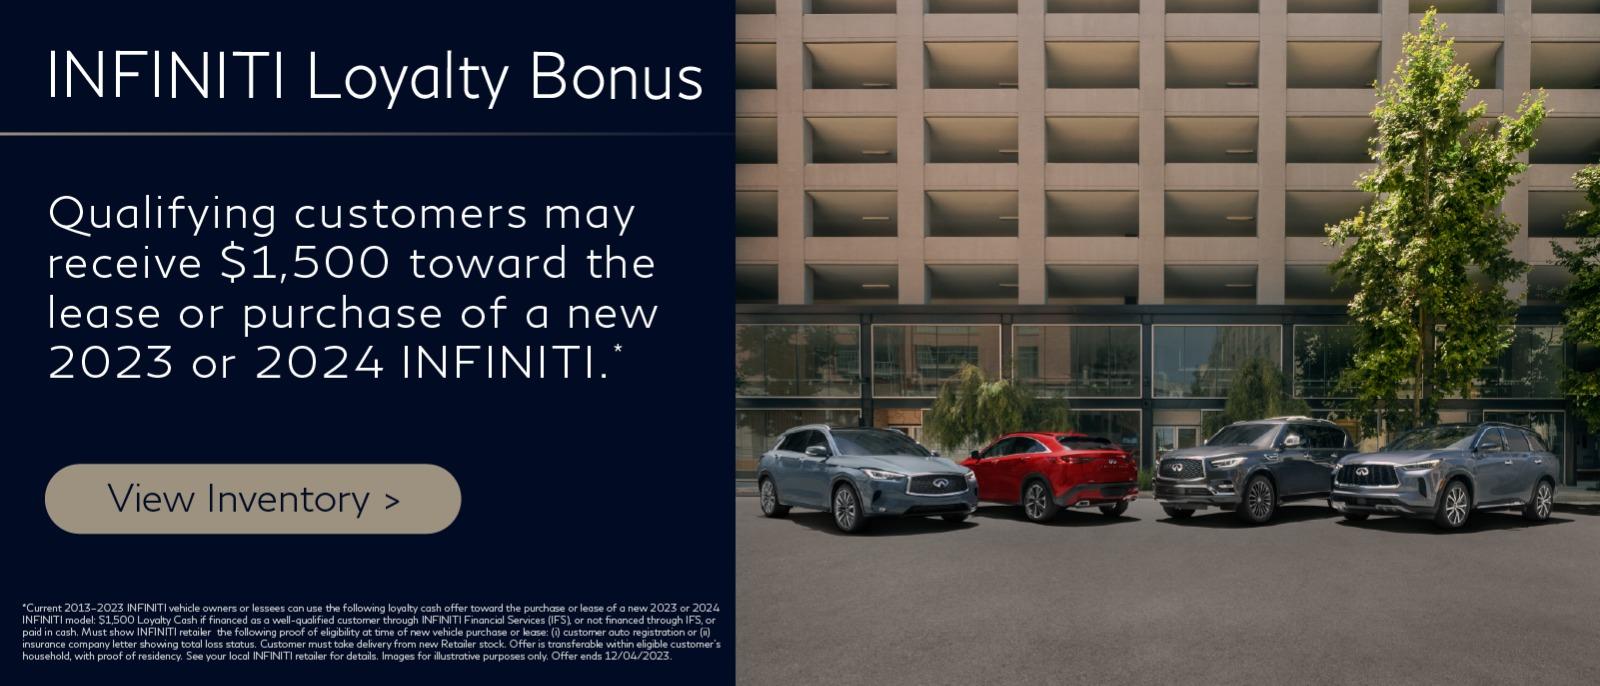 Qualifying customers may receive $1,500 towards the lease or purchase of a new 2023 or 2024 Infiniti.